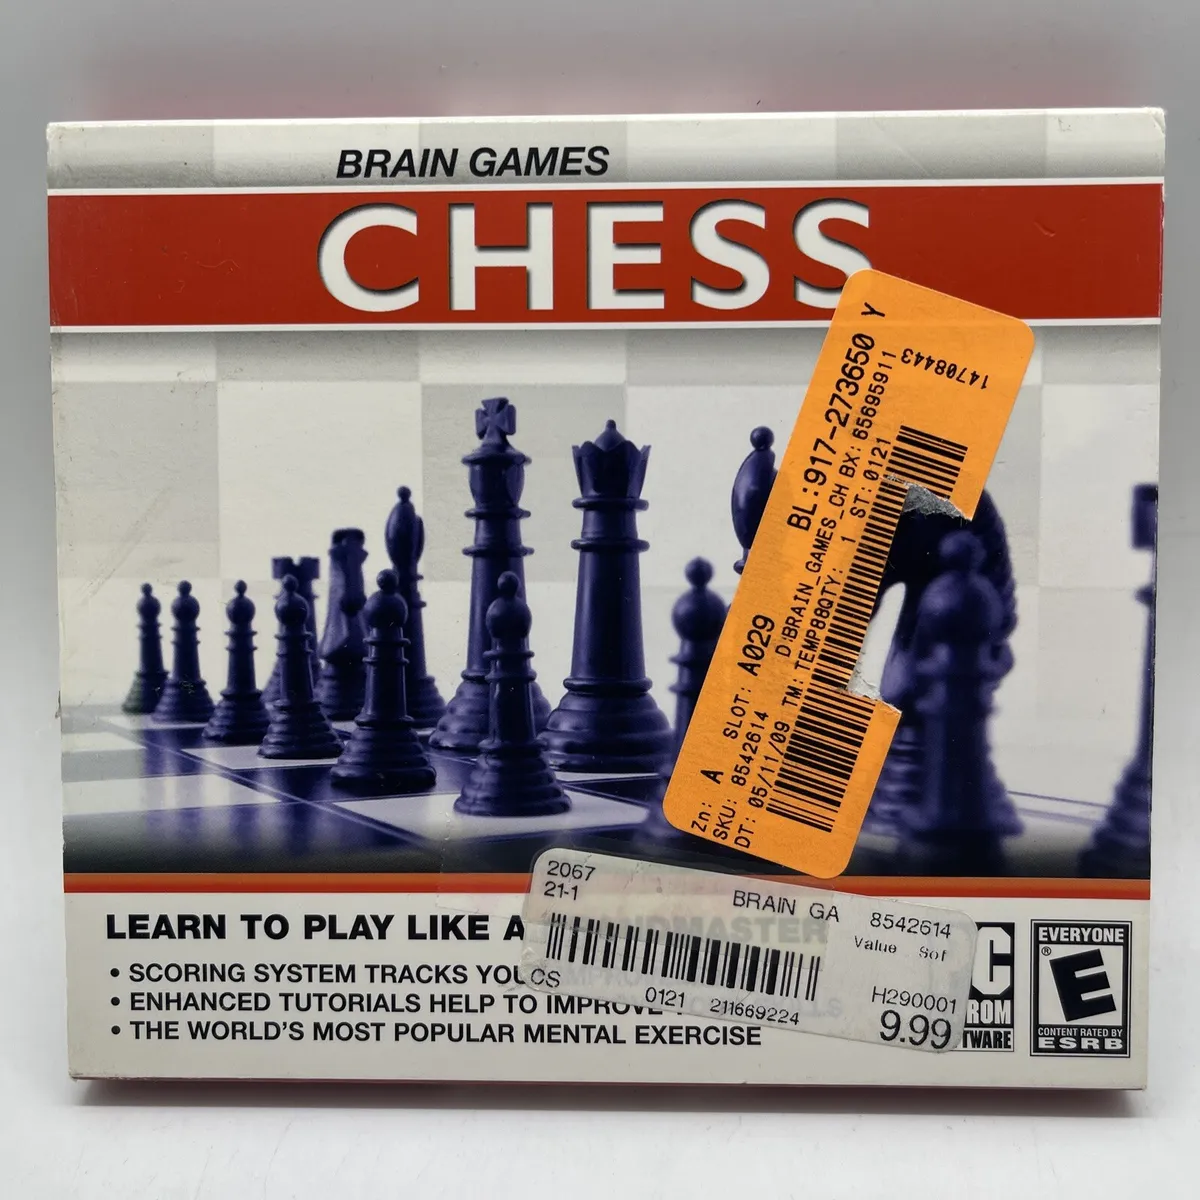 Brain Games Chess Mates PC-CD computer NEW learn to play like a grandmaster  NOS